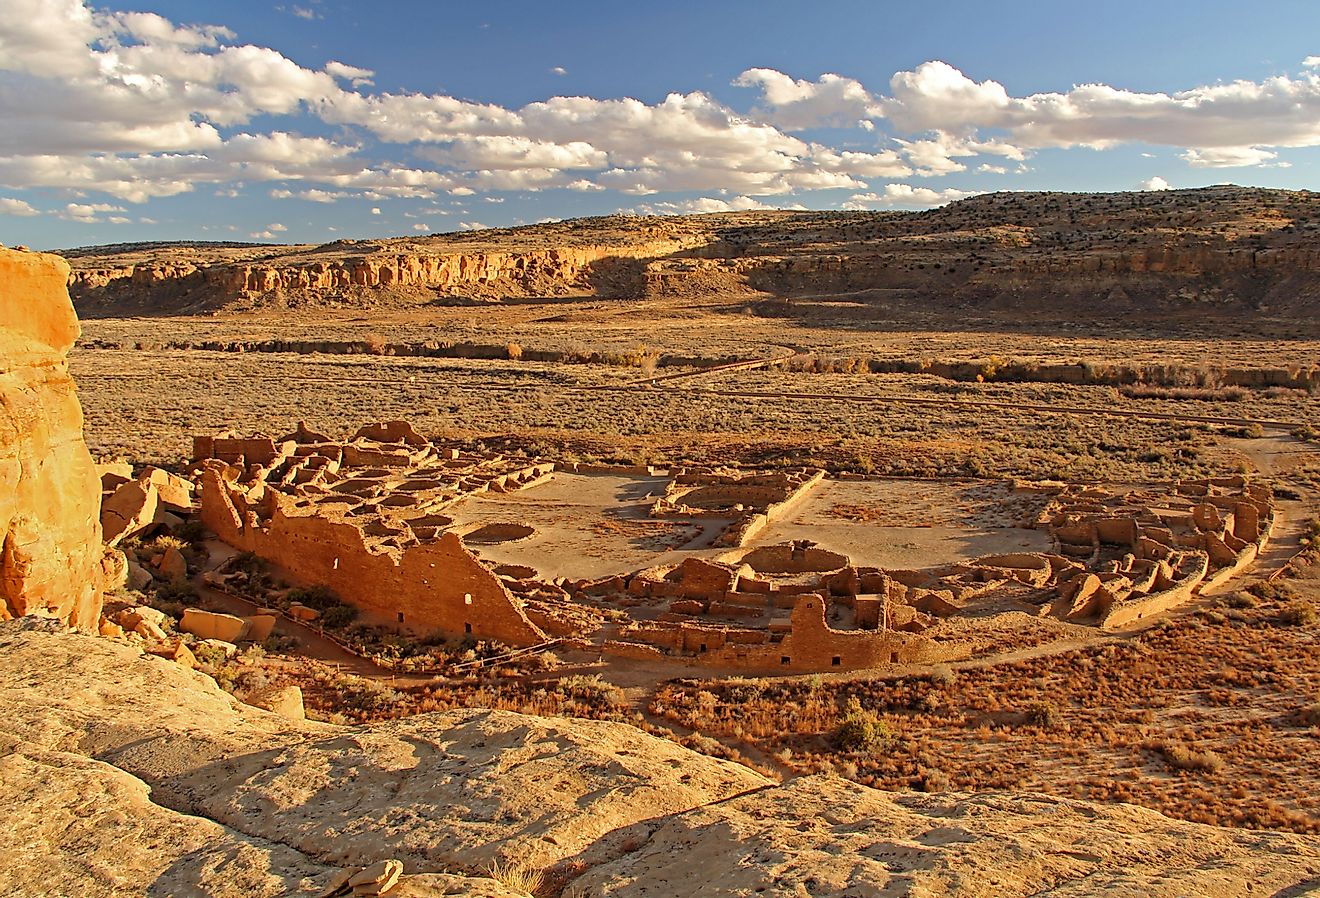 The ancient native american ruins of Pueblo Bonito in Chaco Culture National Historical Park.